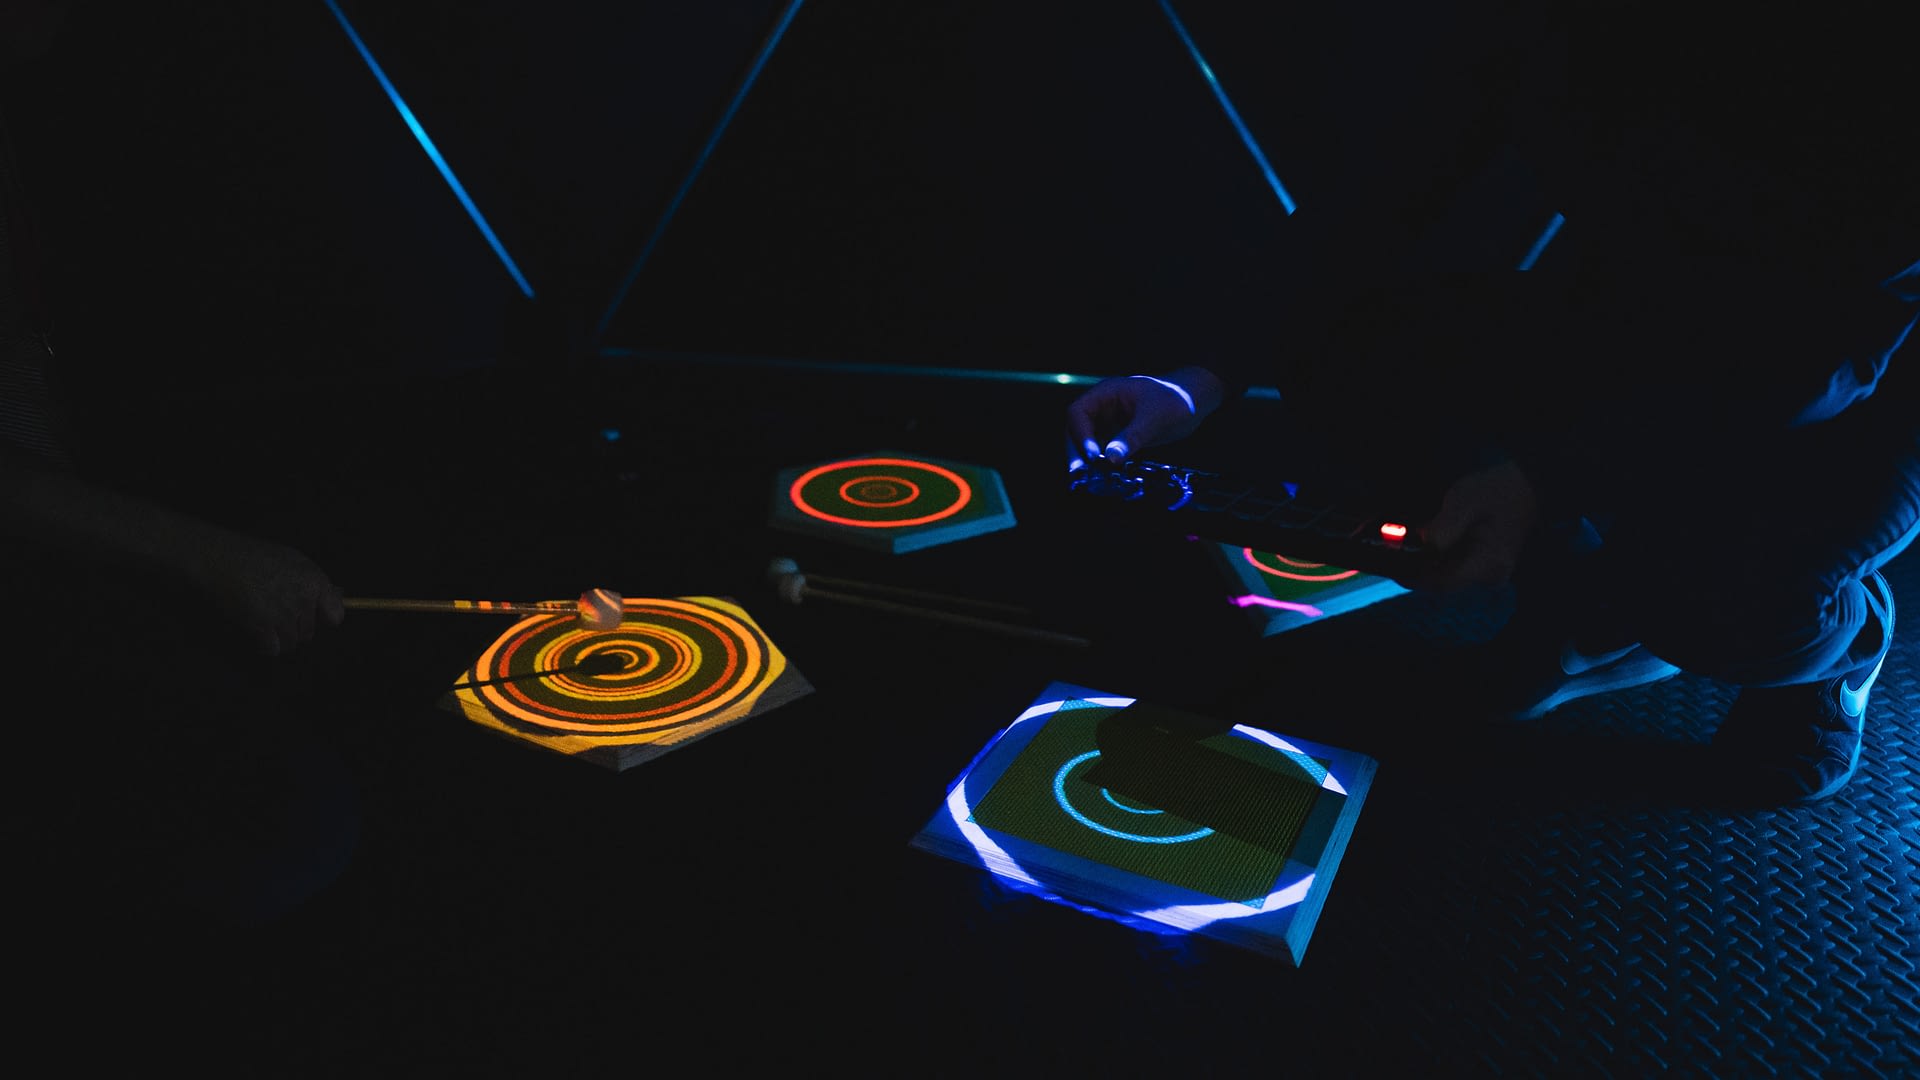 Circular multi-colour patterns projected onto pads are played with a drumstick